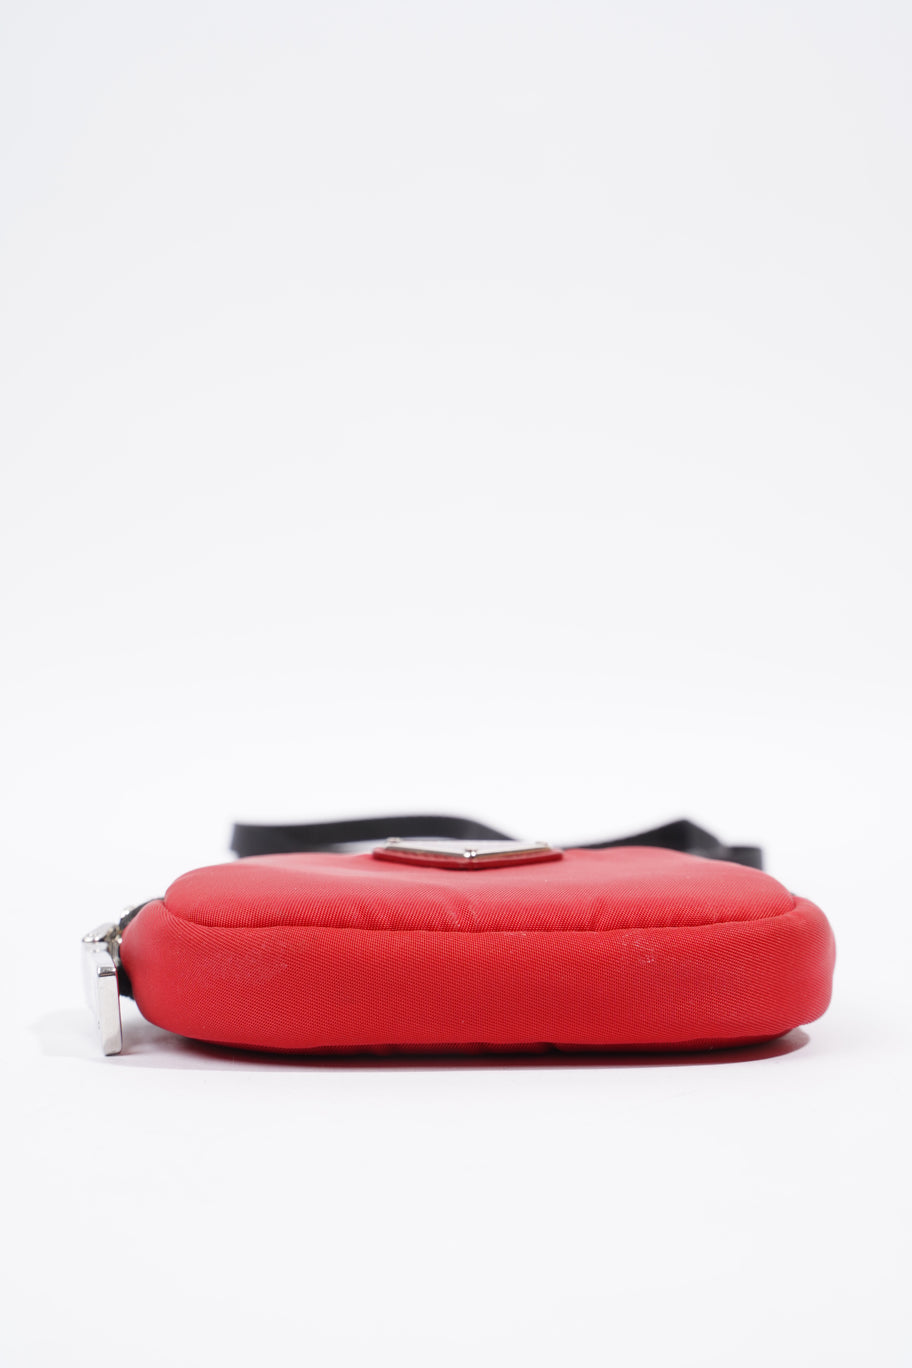 Pouch With Strap Red Nylon Image 5